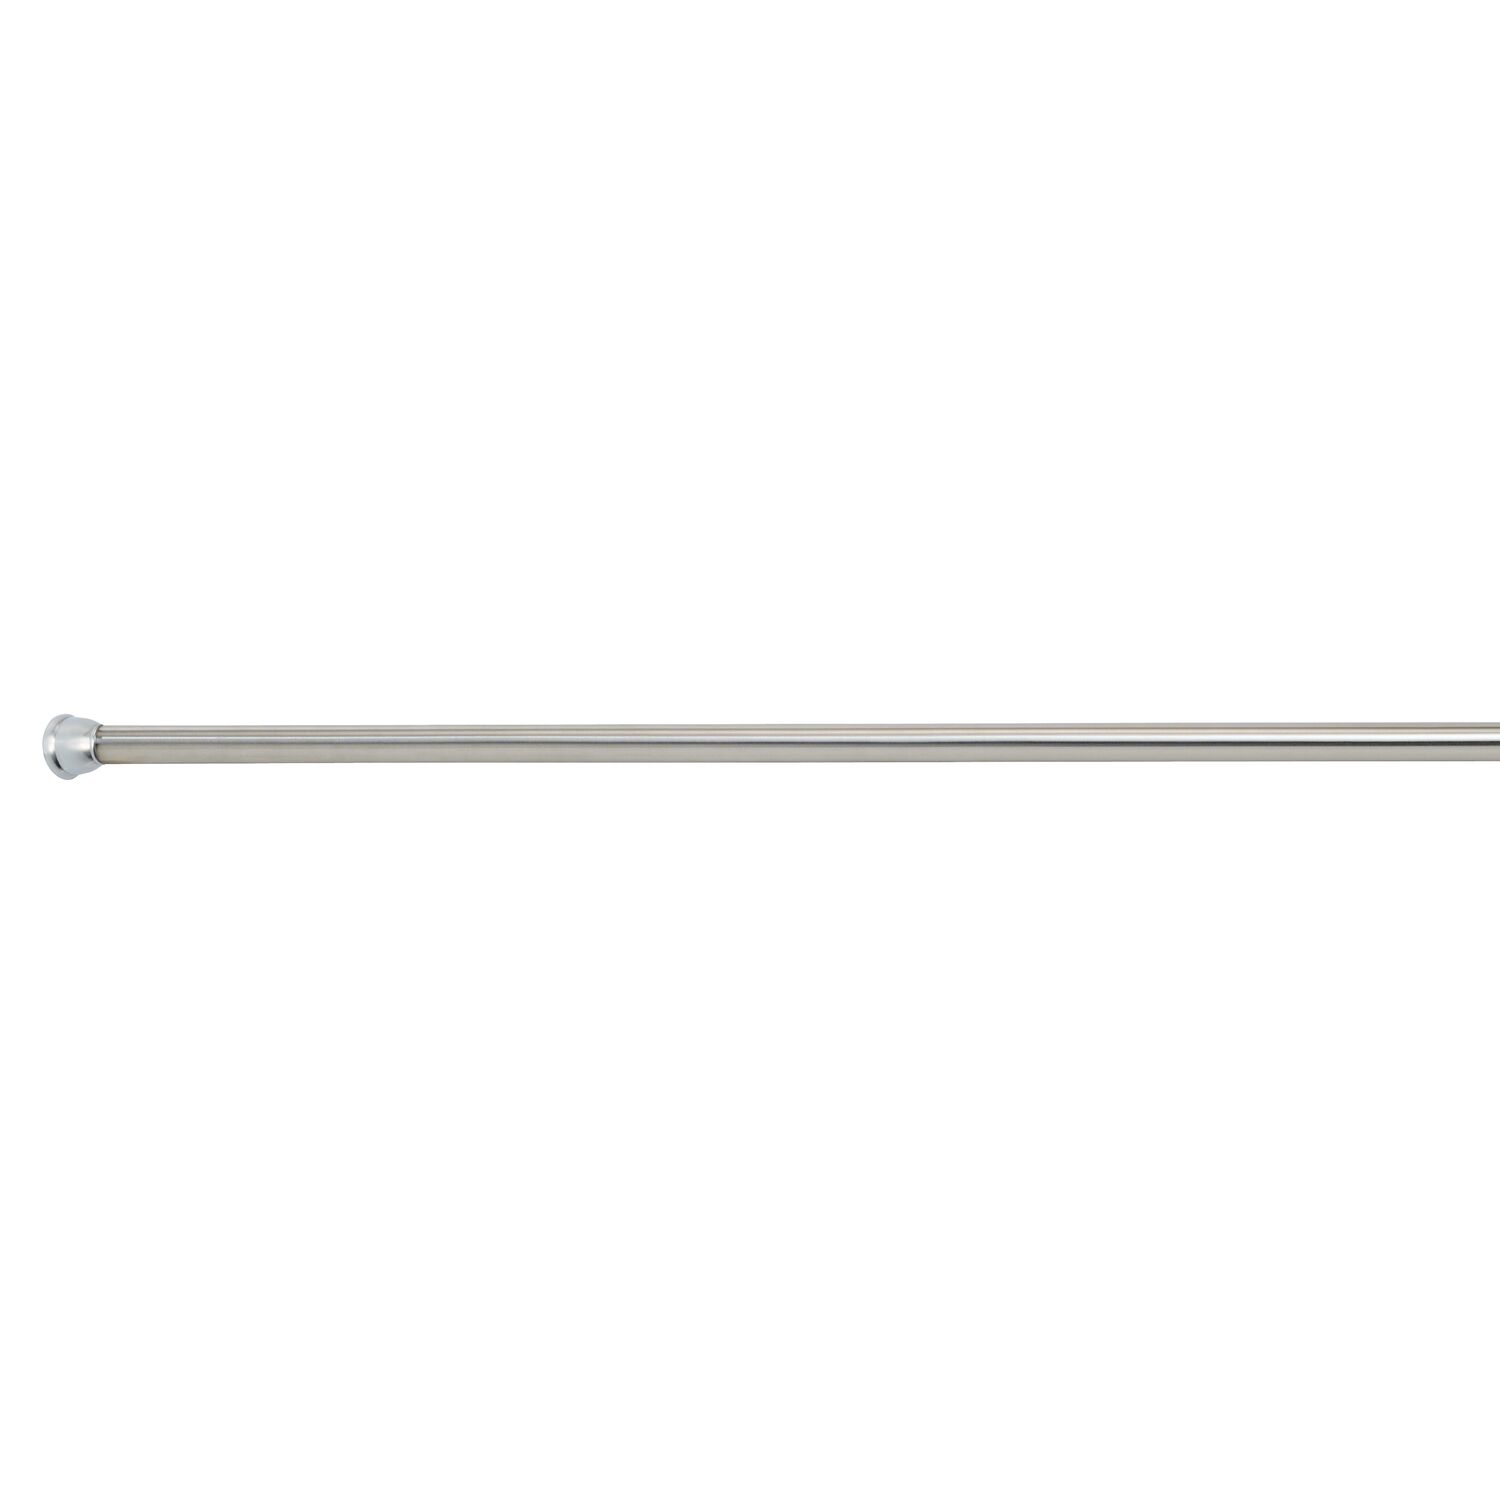 InterDesign Forma Ultra Shower Curtain Tension Rod, Brushed Stainless Steel - image 4 of 4